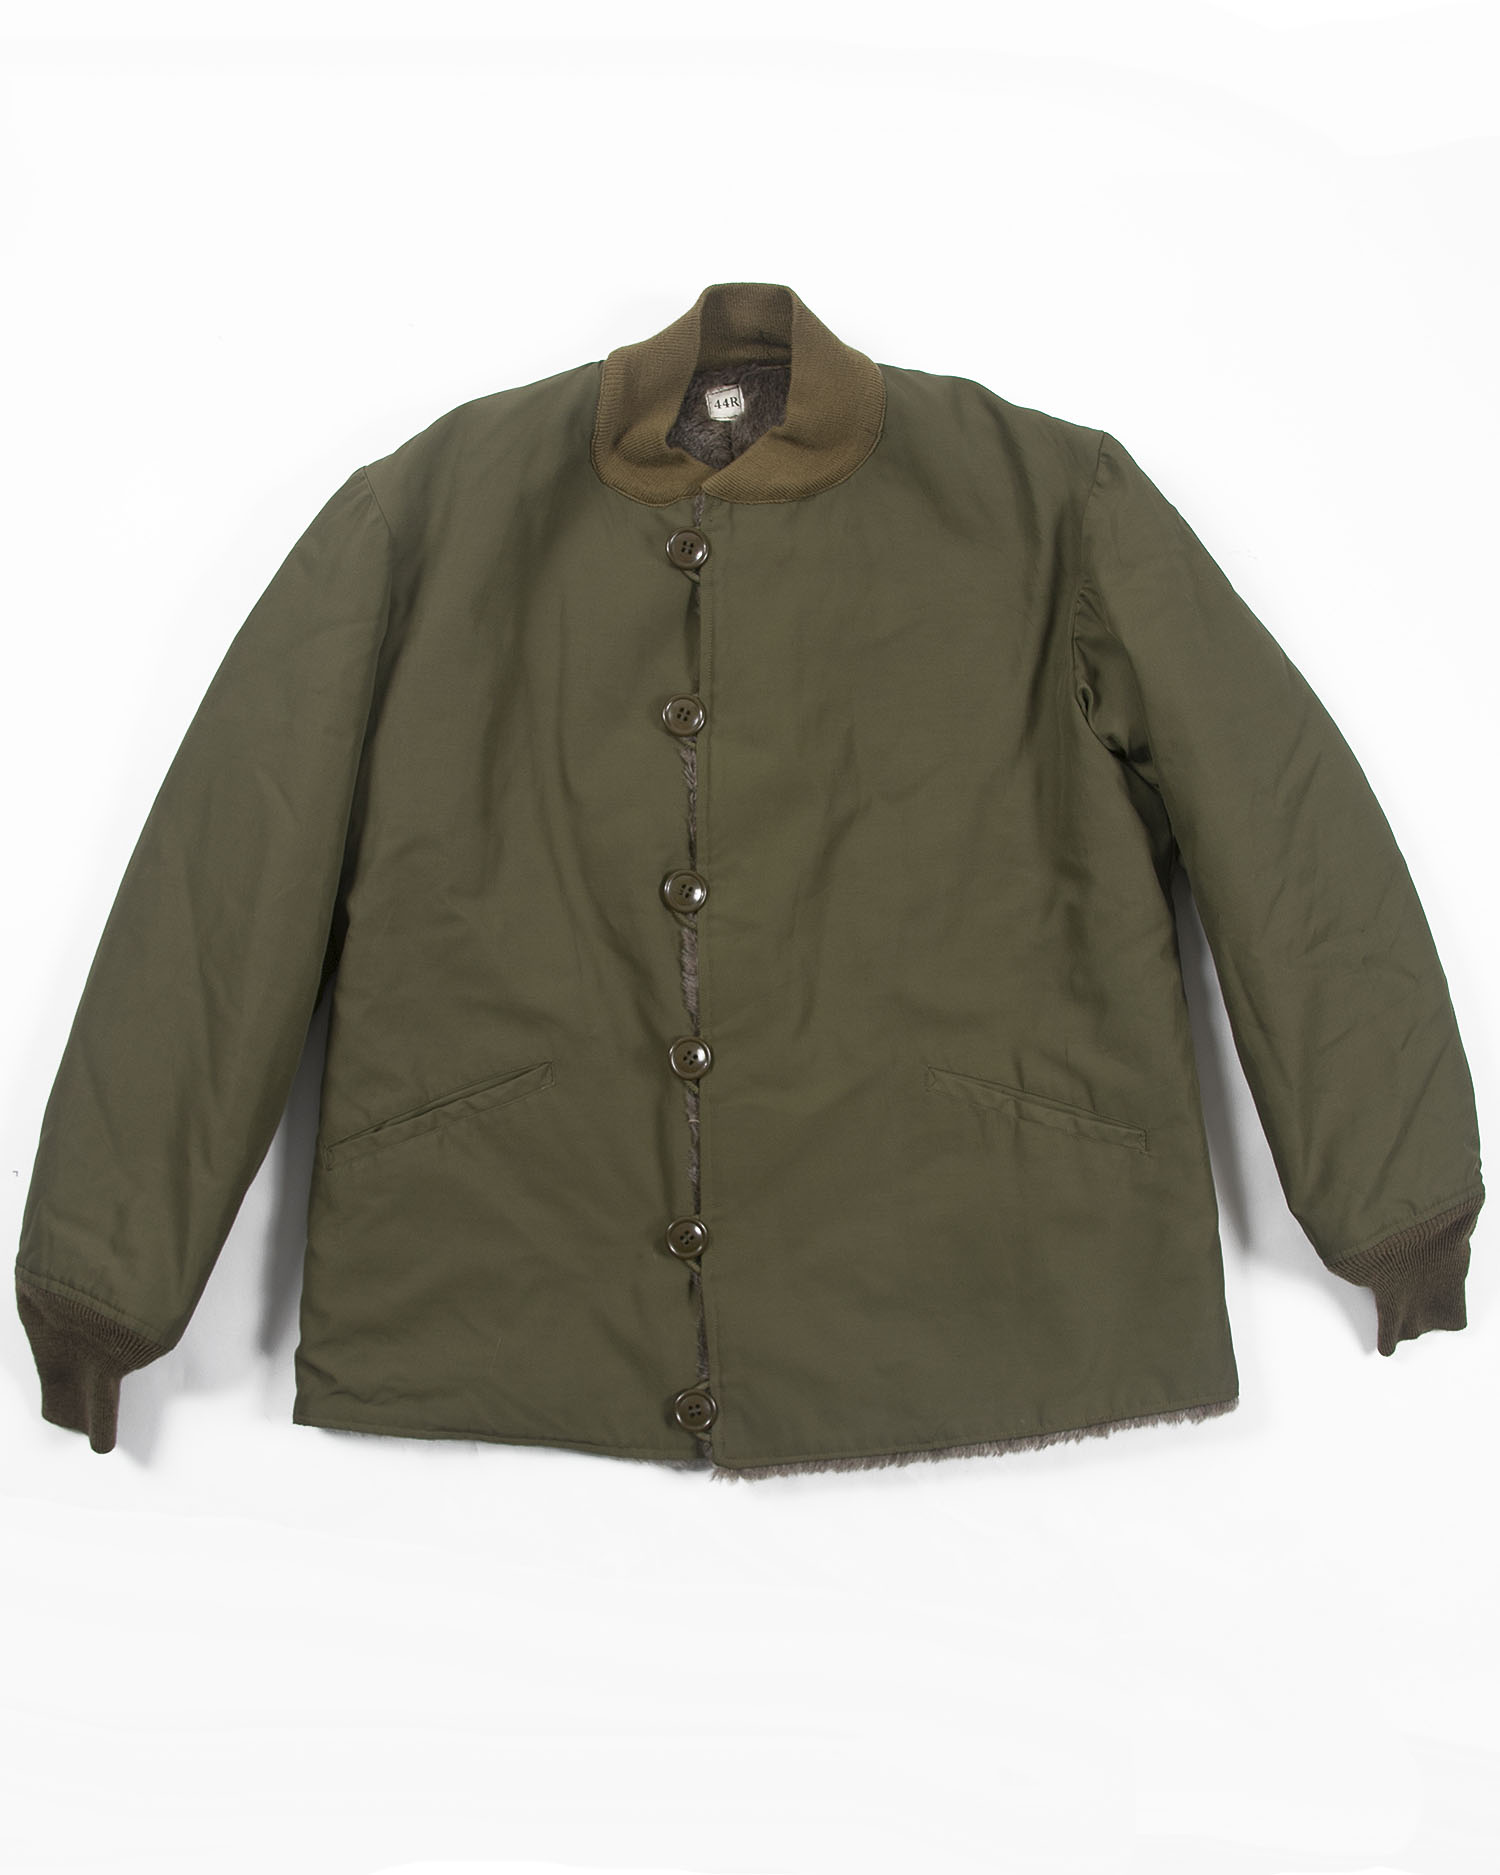 M43 Field Jacket Liners At The Front